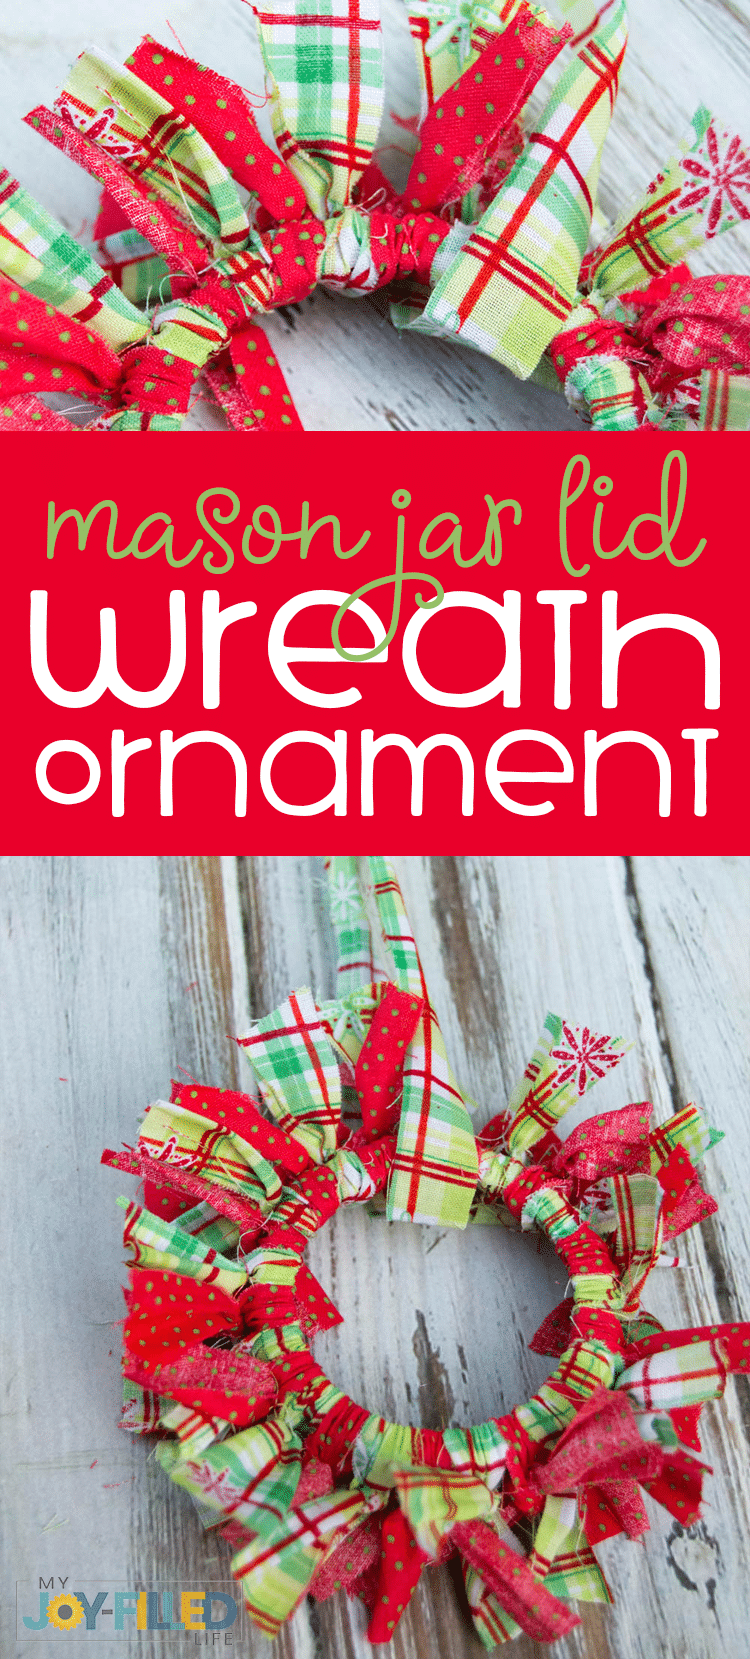 This mason jar lid wreath ornament is such a fun and easy homemade Christmas ornament! It makes a great gift and kids will love helping with this one. #Christmas #homemadechristmas #christmasornament #masonjar